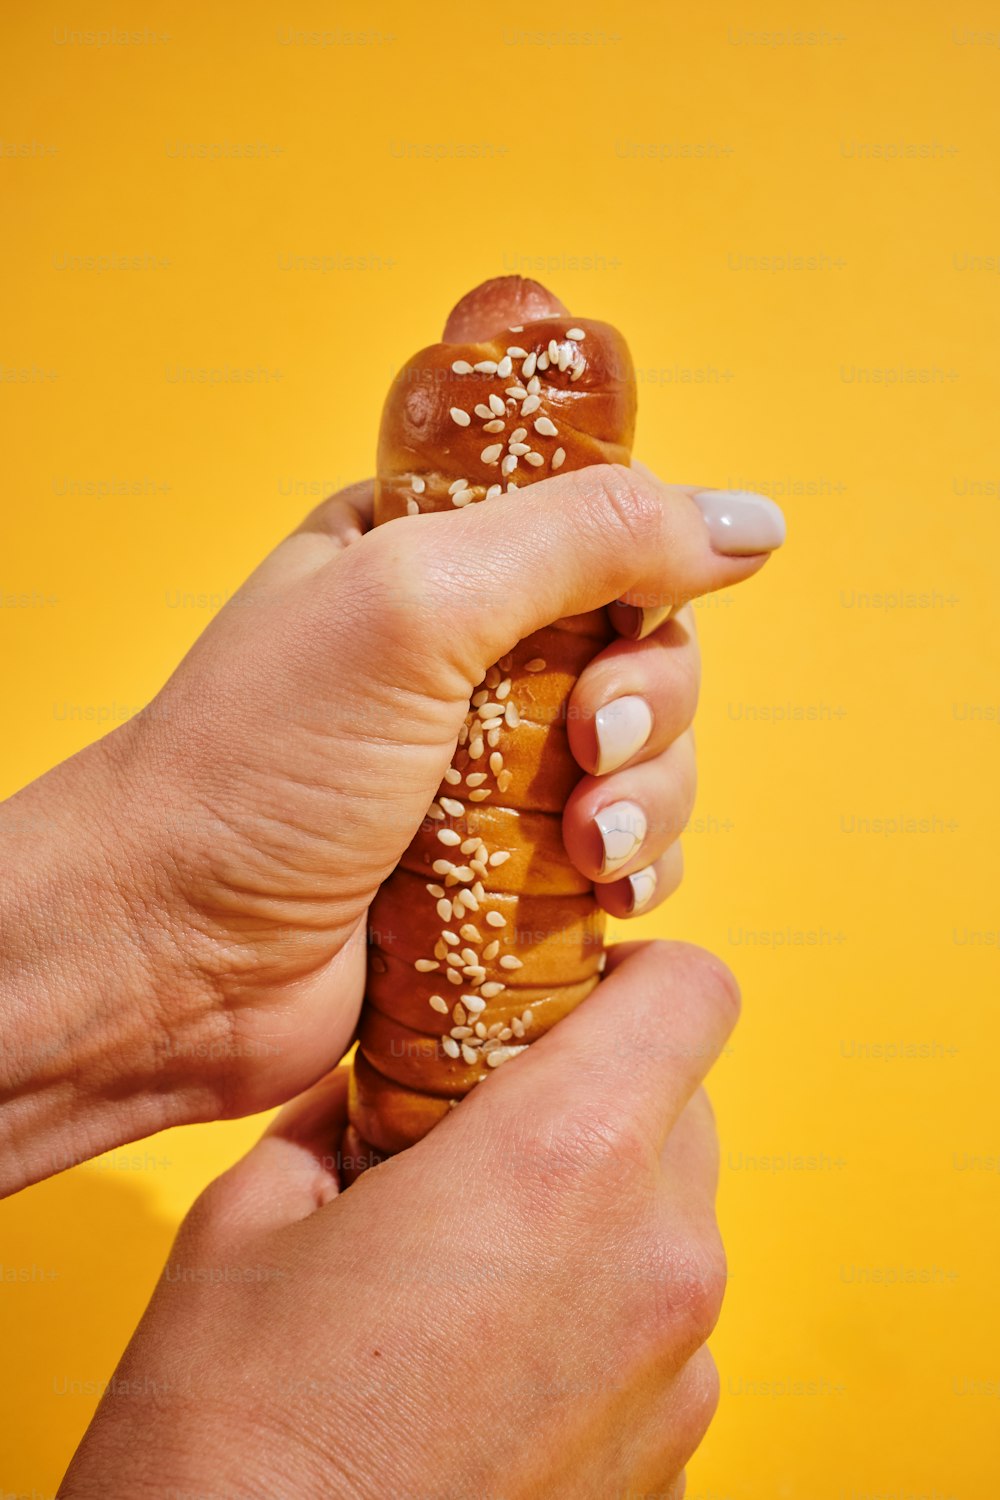 a person holding a pretzel in their hand